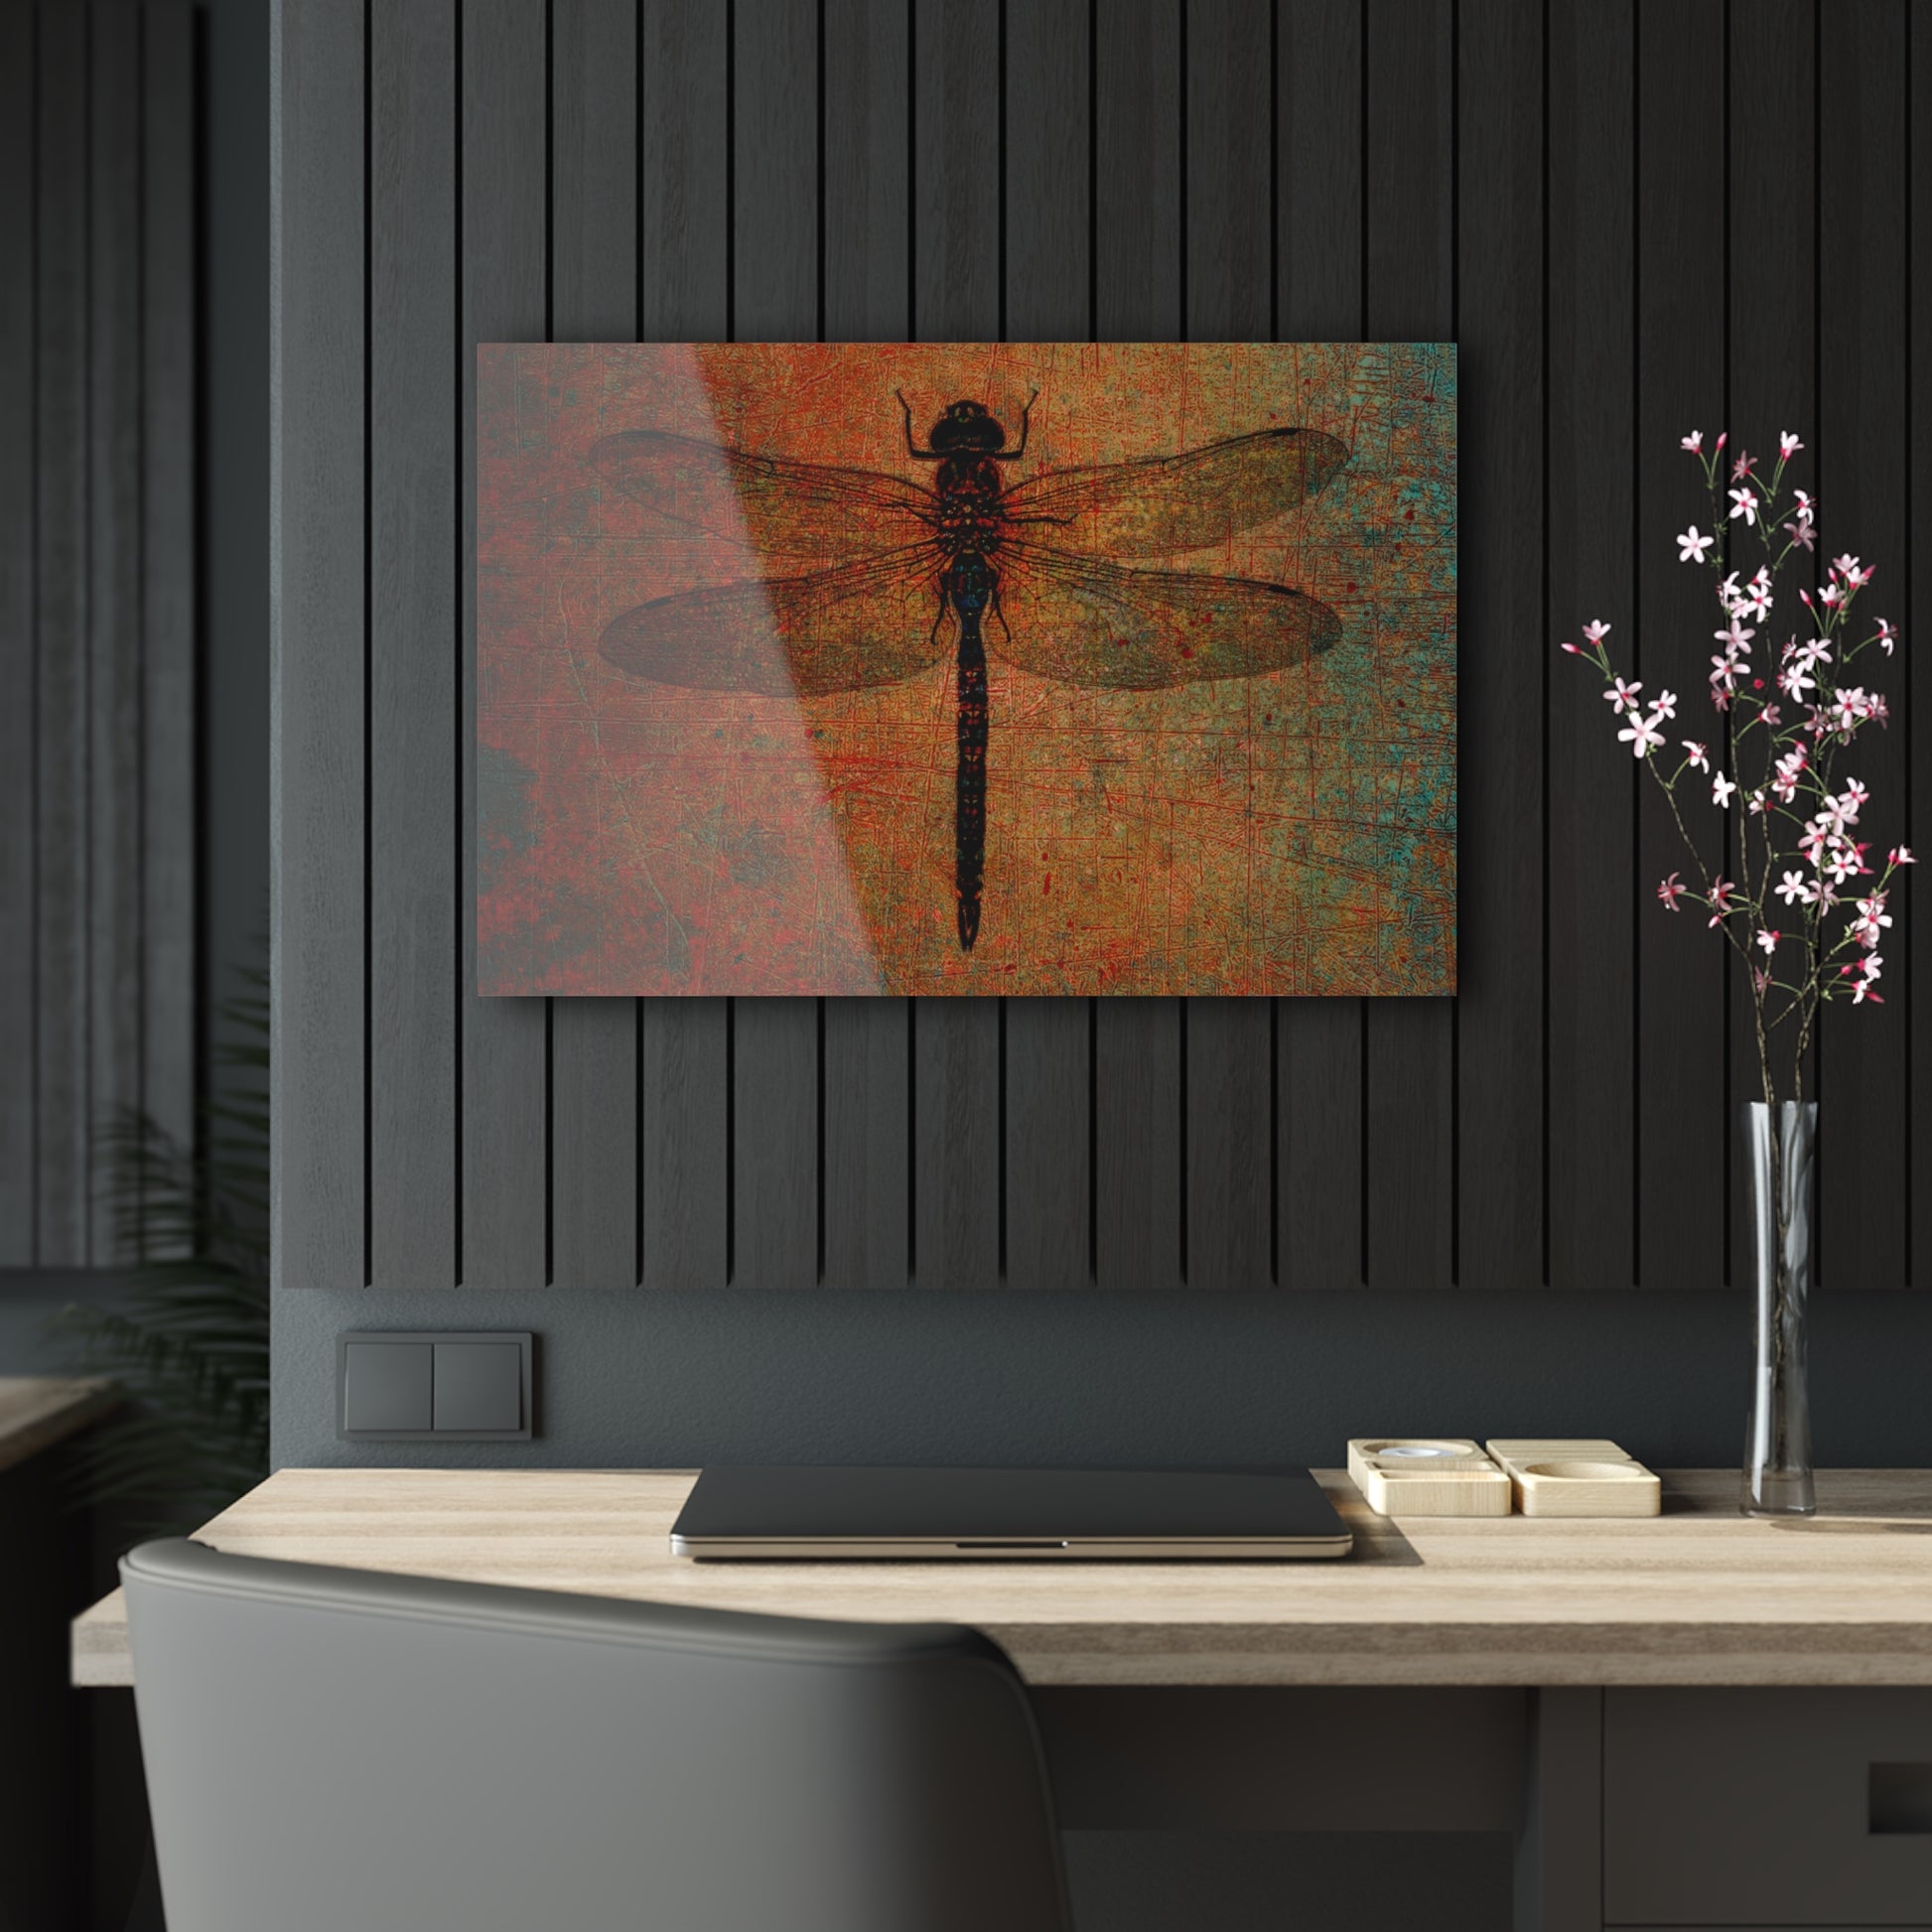 Dragonfly on Distressed Brown Stone Background on a Crystal Clear Acrylic Panel 30x20 hung on dark wall